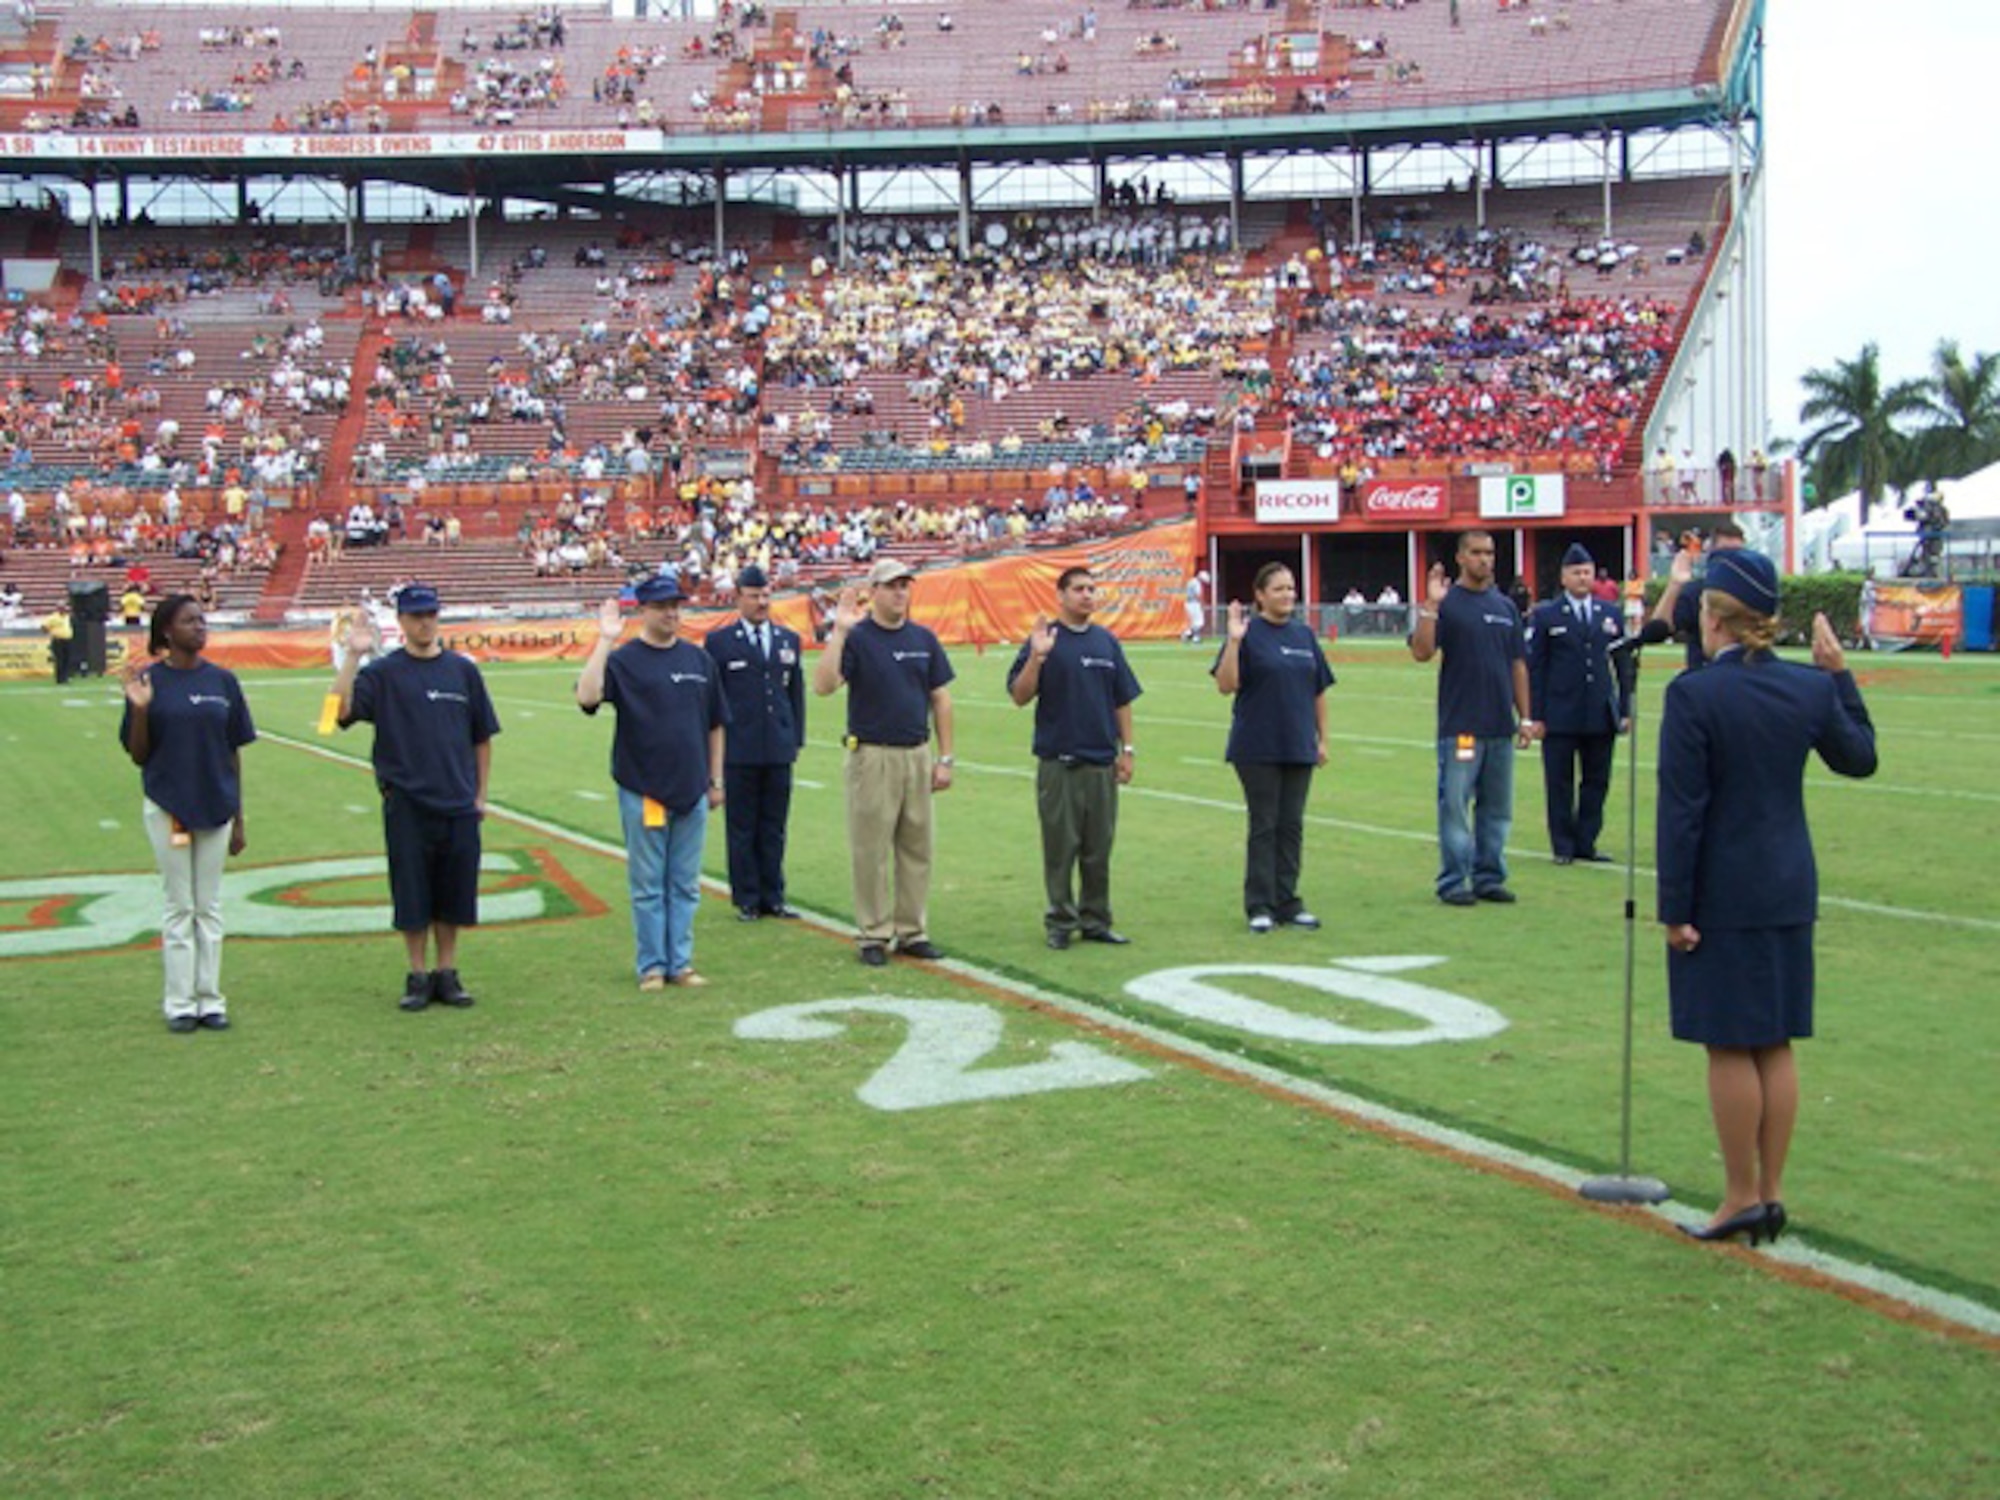 1st Lt. Katherine Easevoli, 482nd Fighter Wing executive officer, leads the oath of enlistment with nine Homestead reservists on the Orange Bowl field during the pre-game festivities of the University of Miami vs. Georgia Tech football game on Saturday. The 482nd Fighter Wing Recruiting Office sponsored the event, which also included a flyover by 93rd Fighter Squadron pilots. (U.S. Air Force photo/Senior Airman Erik Hofmeyer)